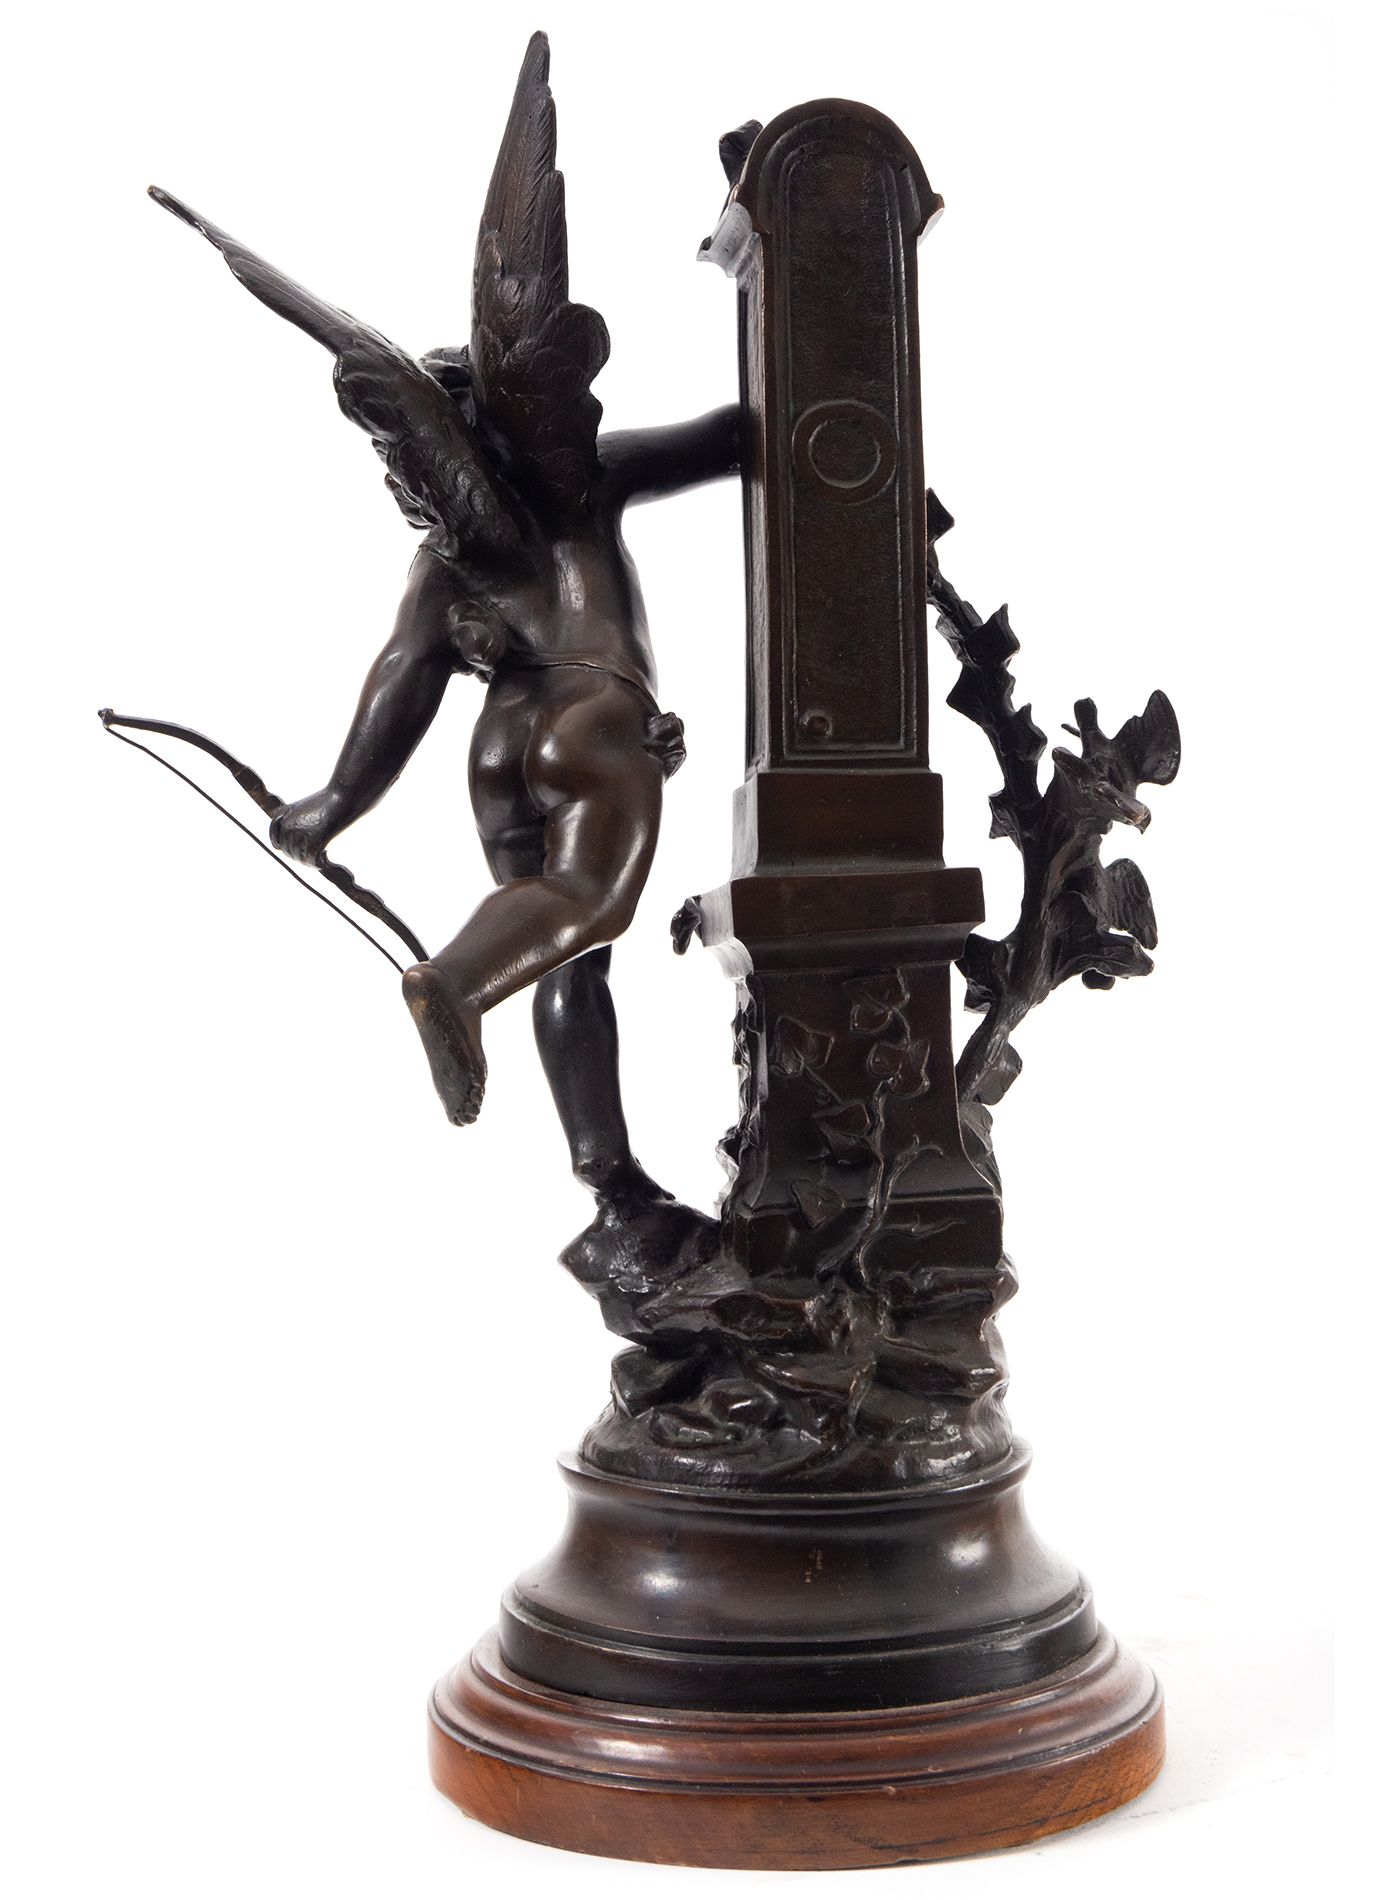 Elegant Cupid at the Fountain in bronze, 19th century French school, signed Bruchon - Image 7 of 7